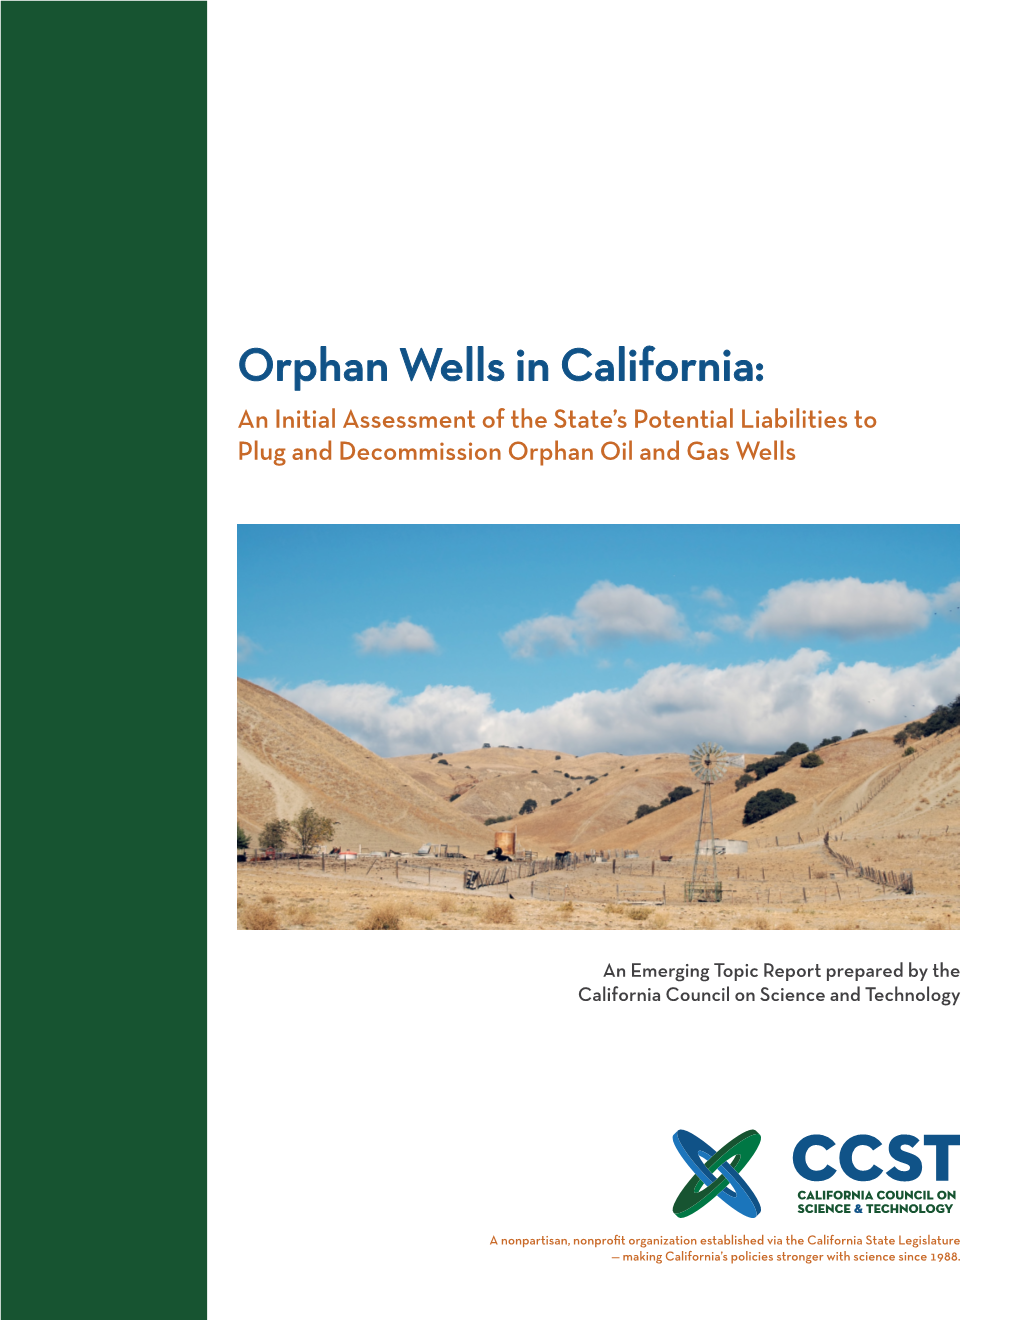 Orphan Wells in California: an Initial Assessment of the State’S Potential Liabilities to Plug and Decommission Orphan Oil and Gas Wells